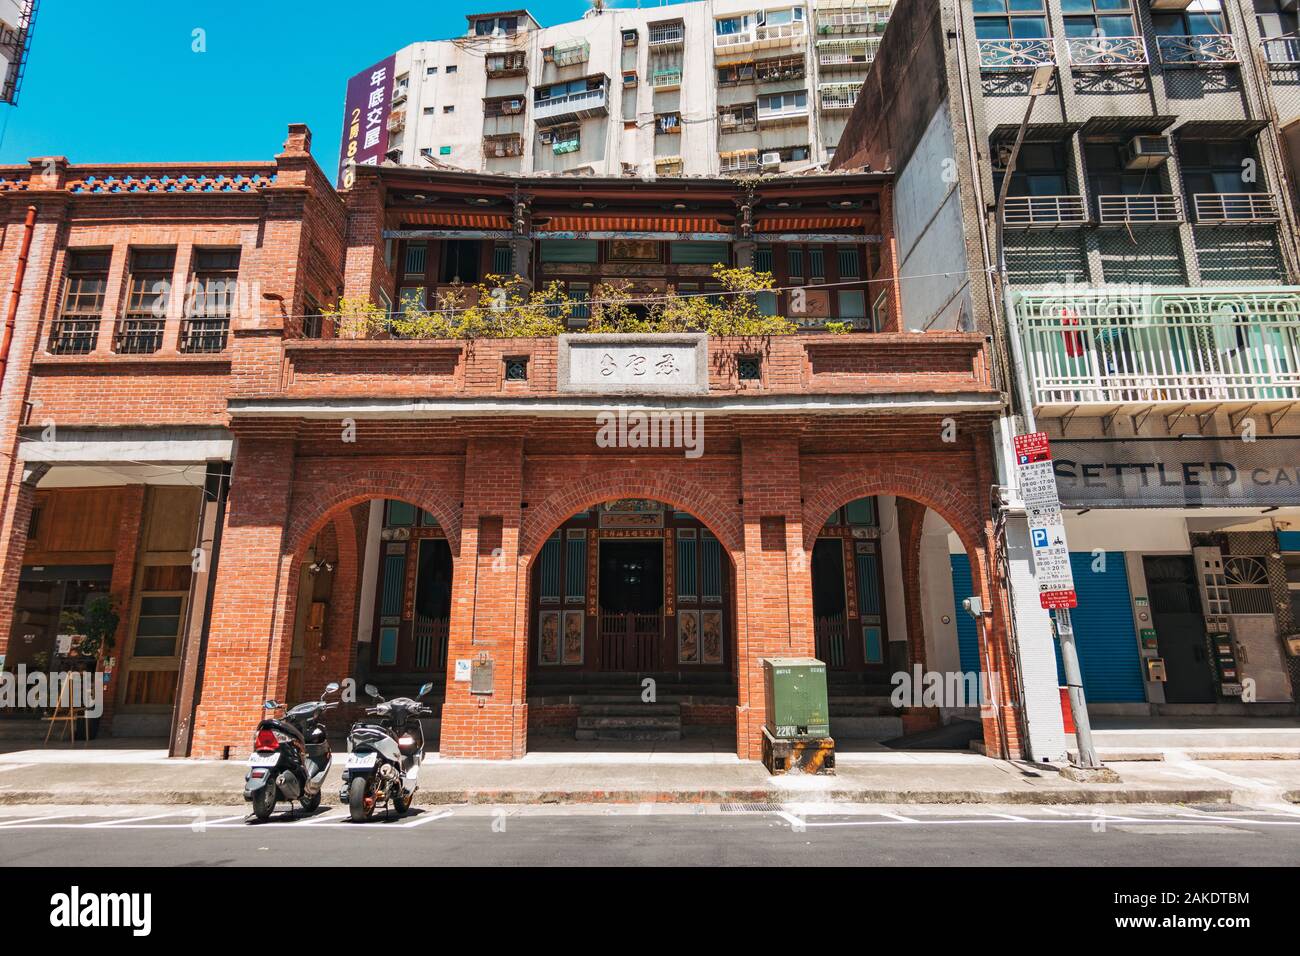 A small old two-story brick house in central Taipei, Taiwan Stock Photo